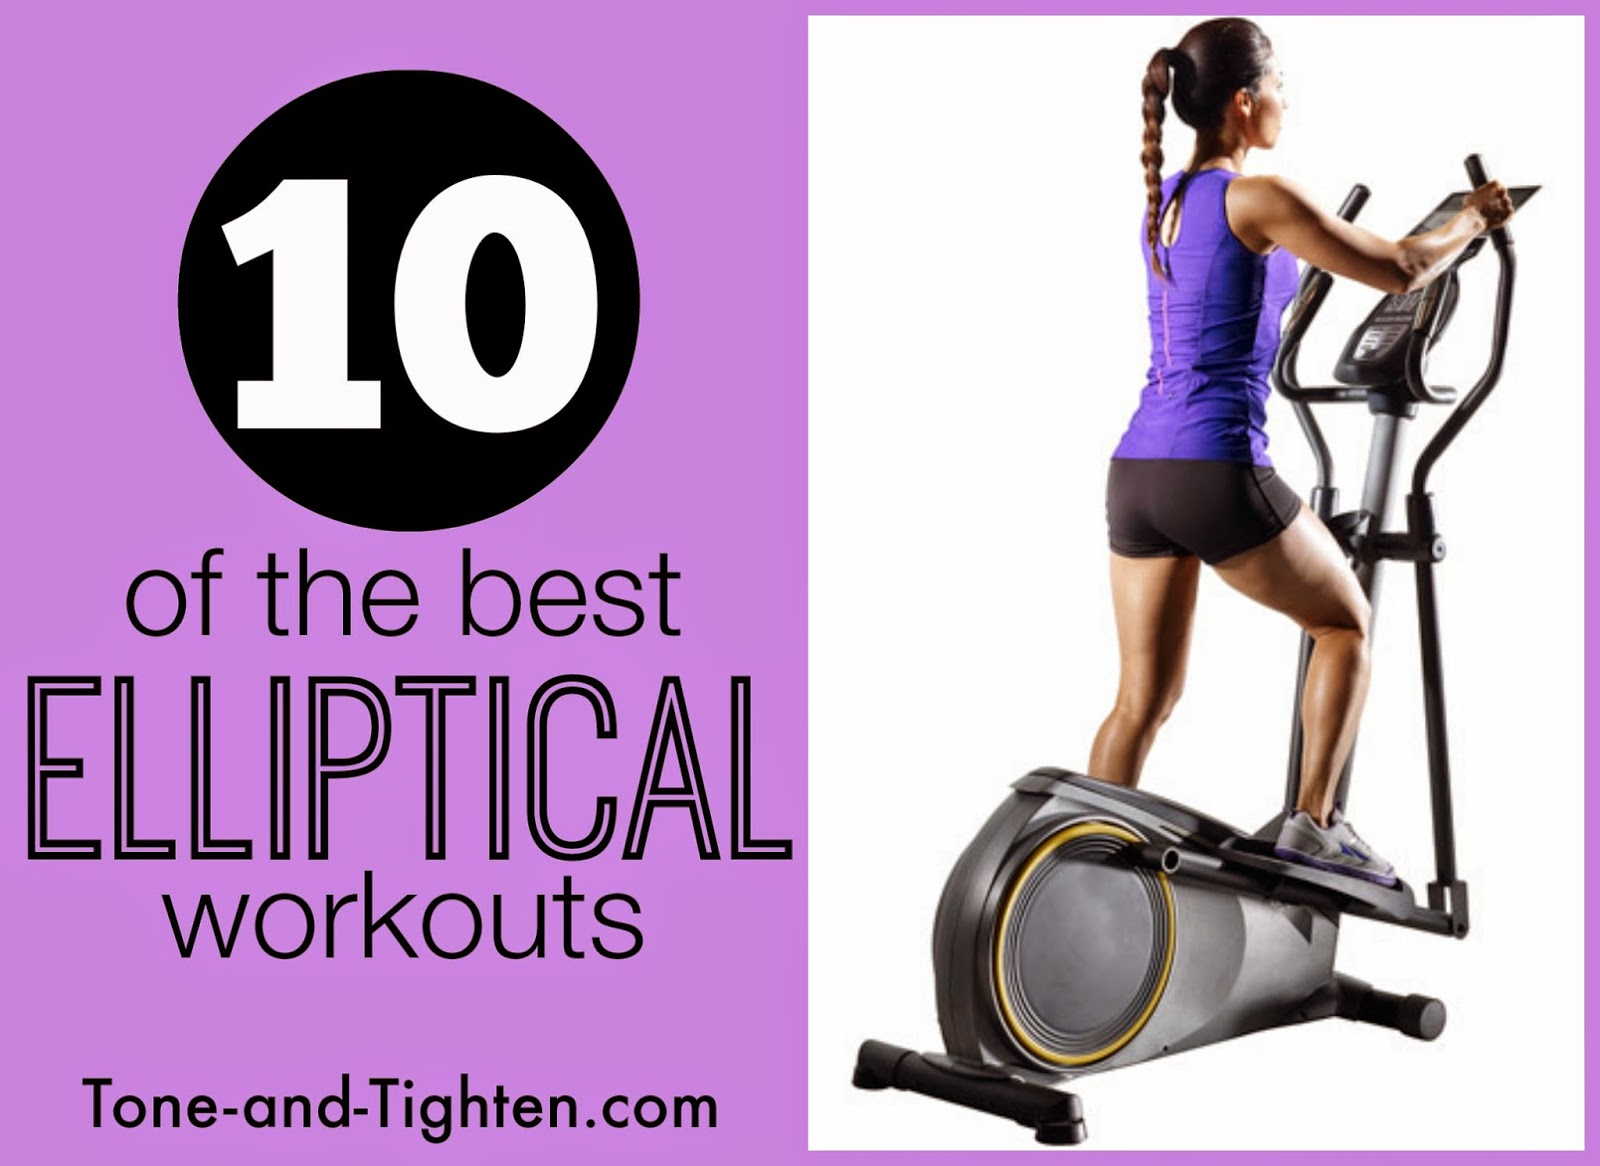 10 of the Best Elliptical Workouts